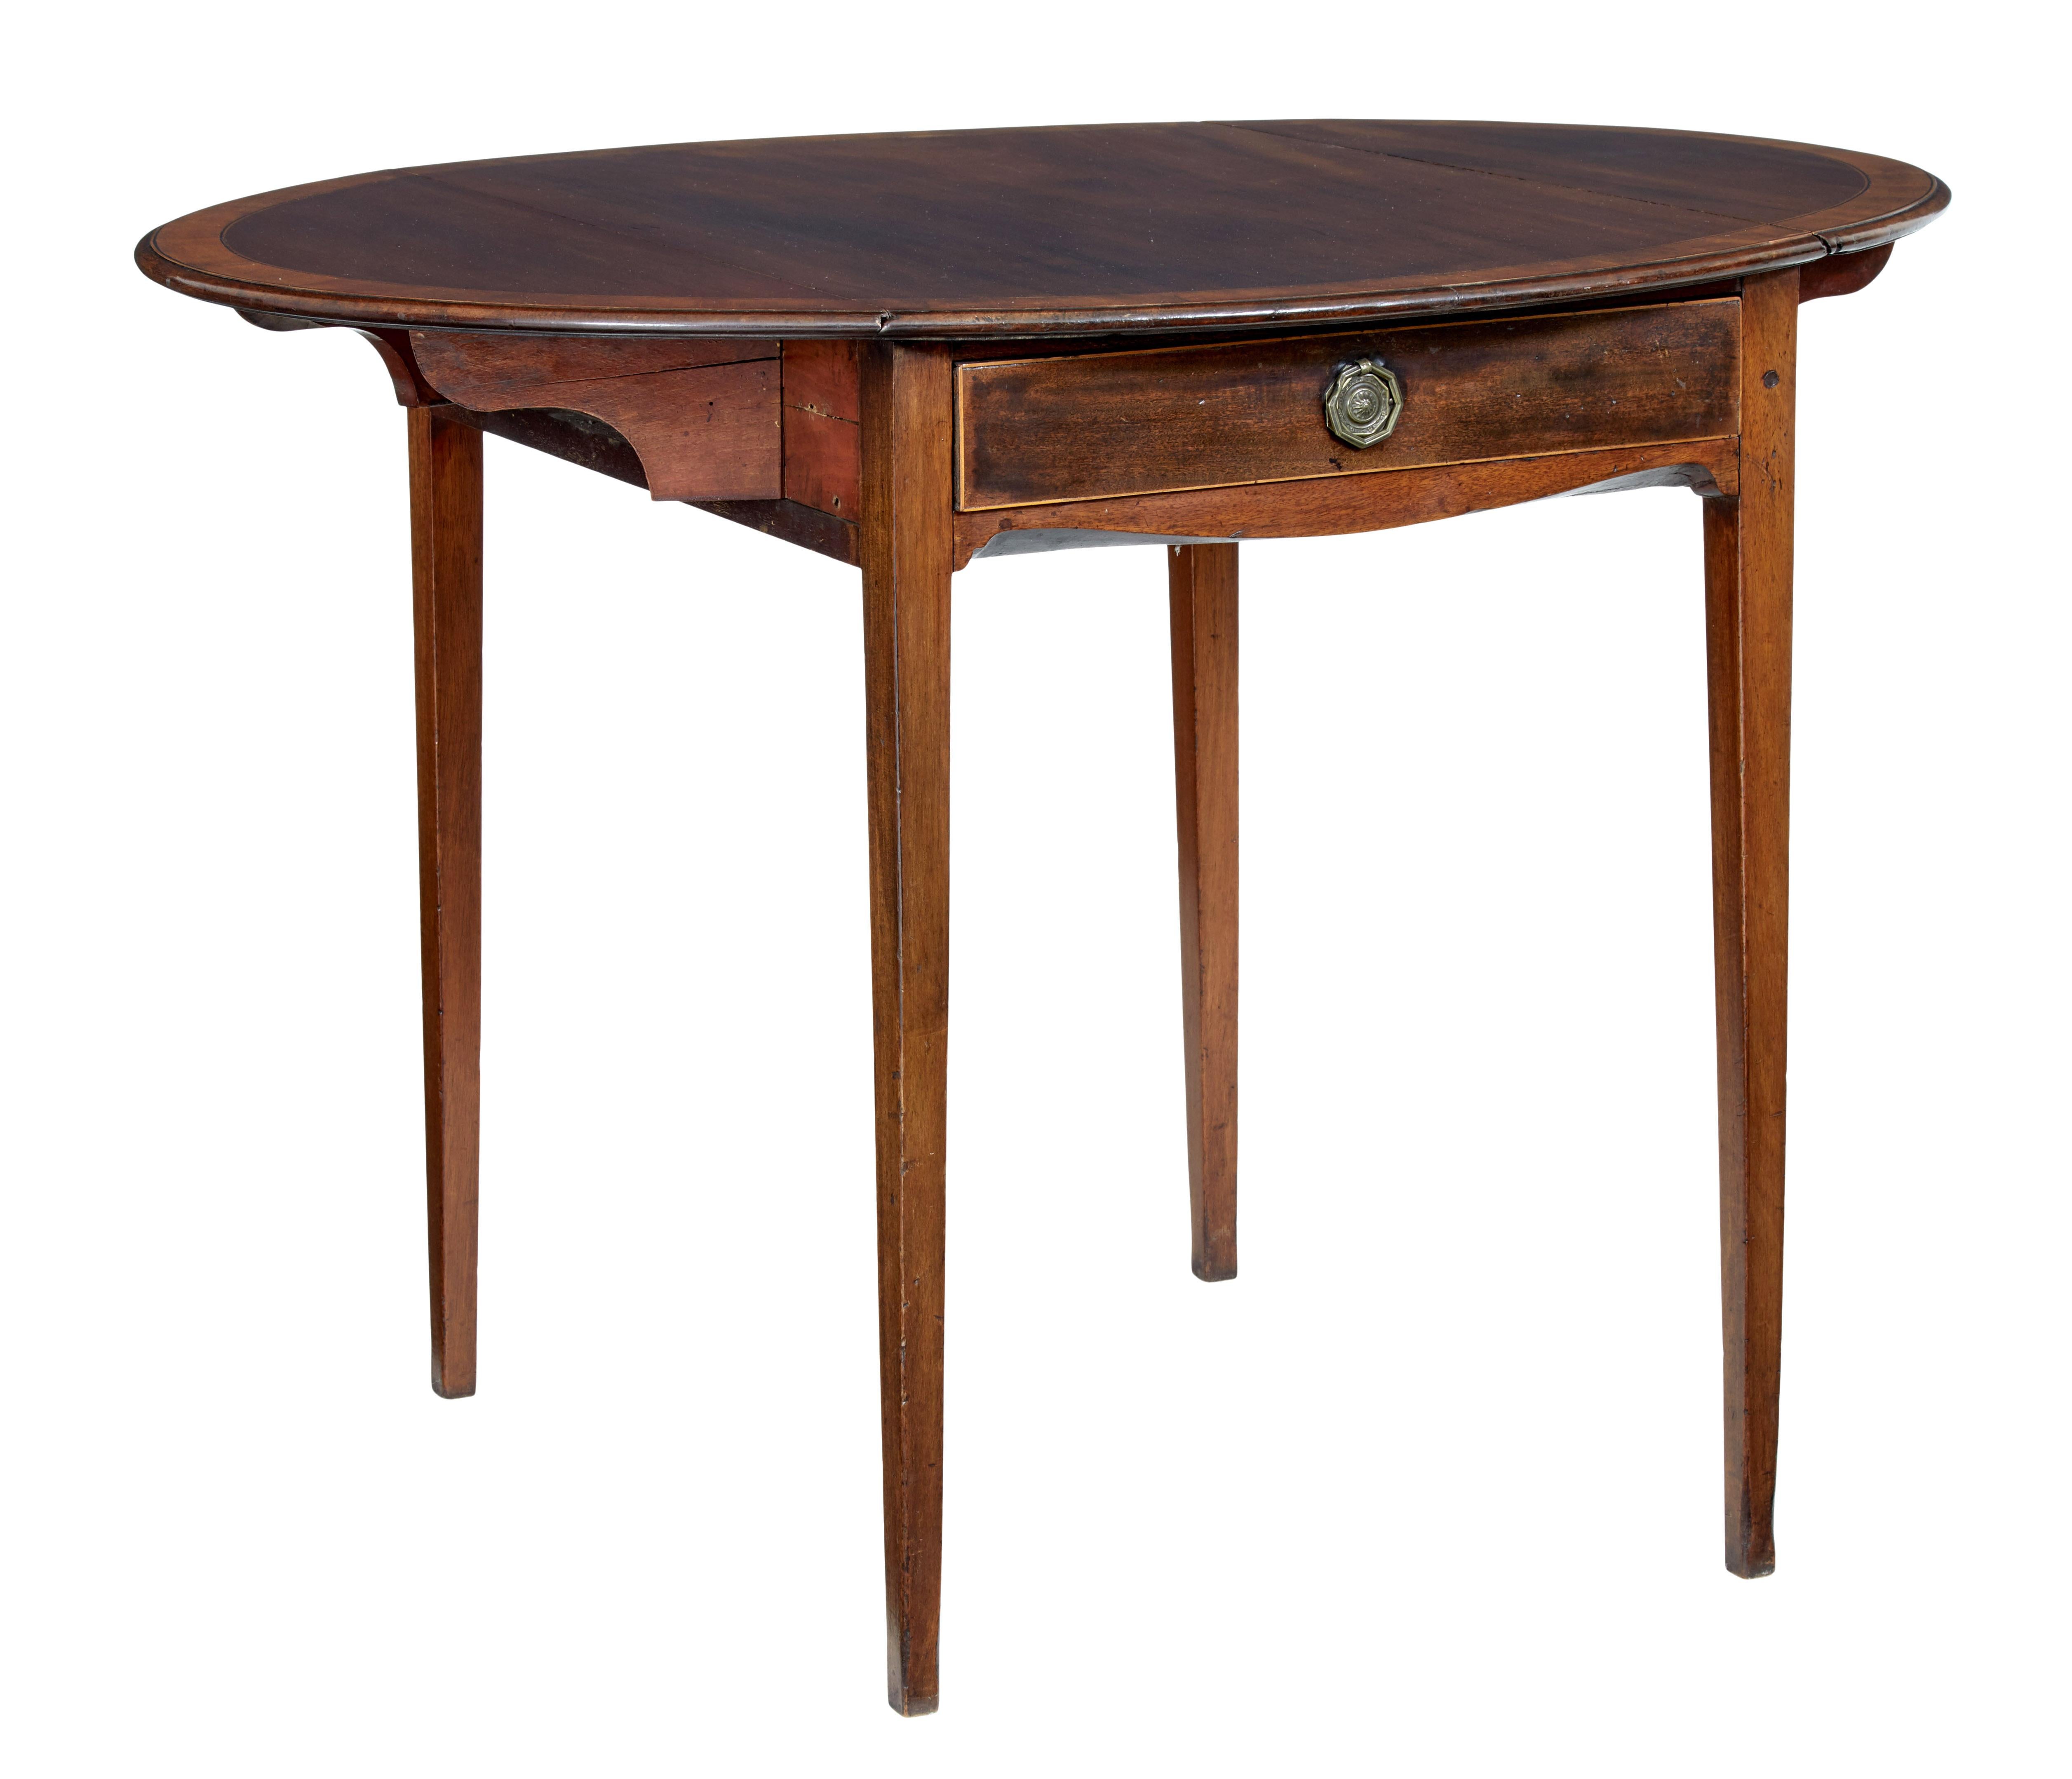 A fine cross banded pembroke table, circa 1825.

Drop leaves open to form a near circular top, mahogany top cross banded and with ebony stringing.

Single drawer to the front with original handle, standing on slight tapered legs.

Minor